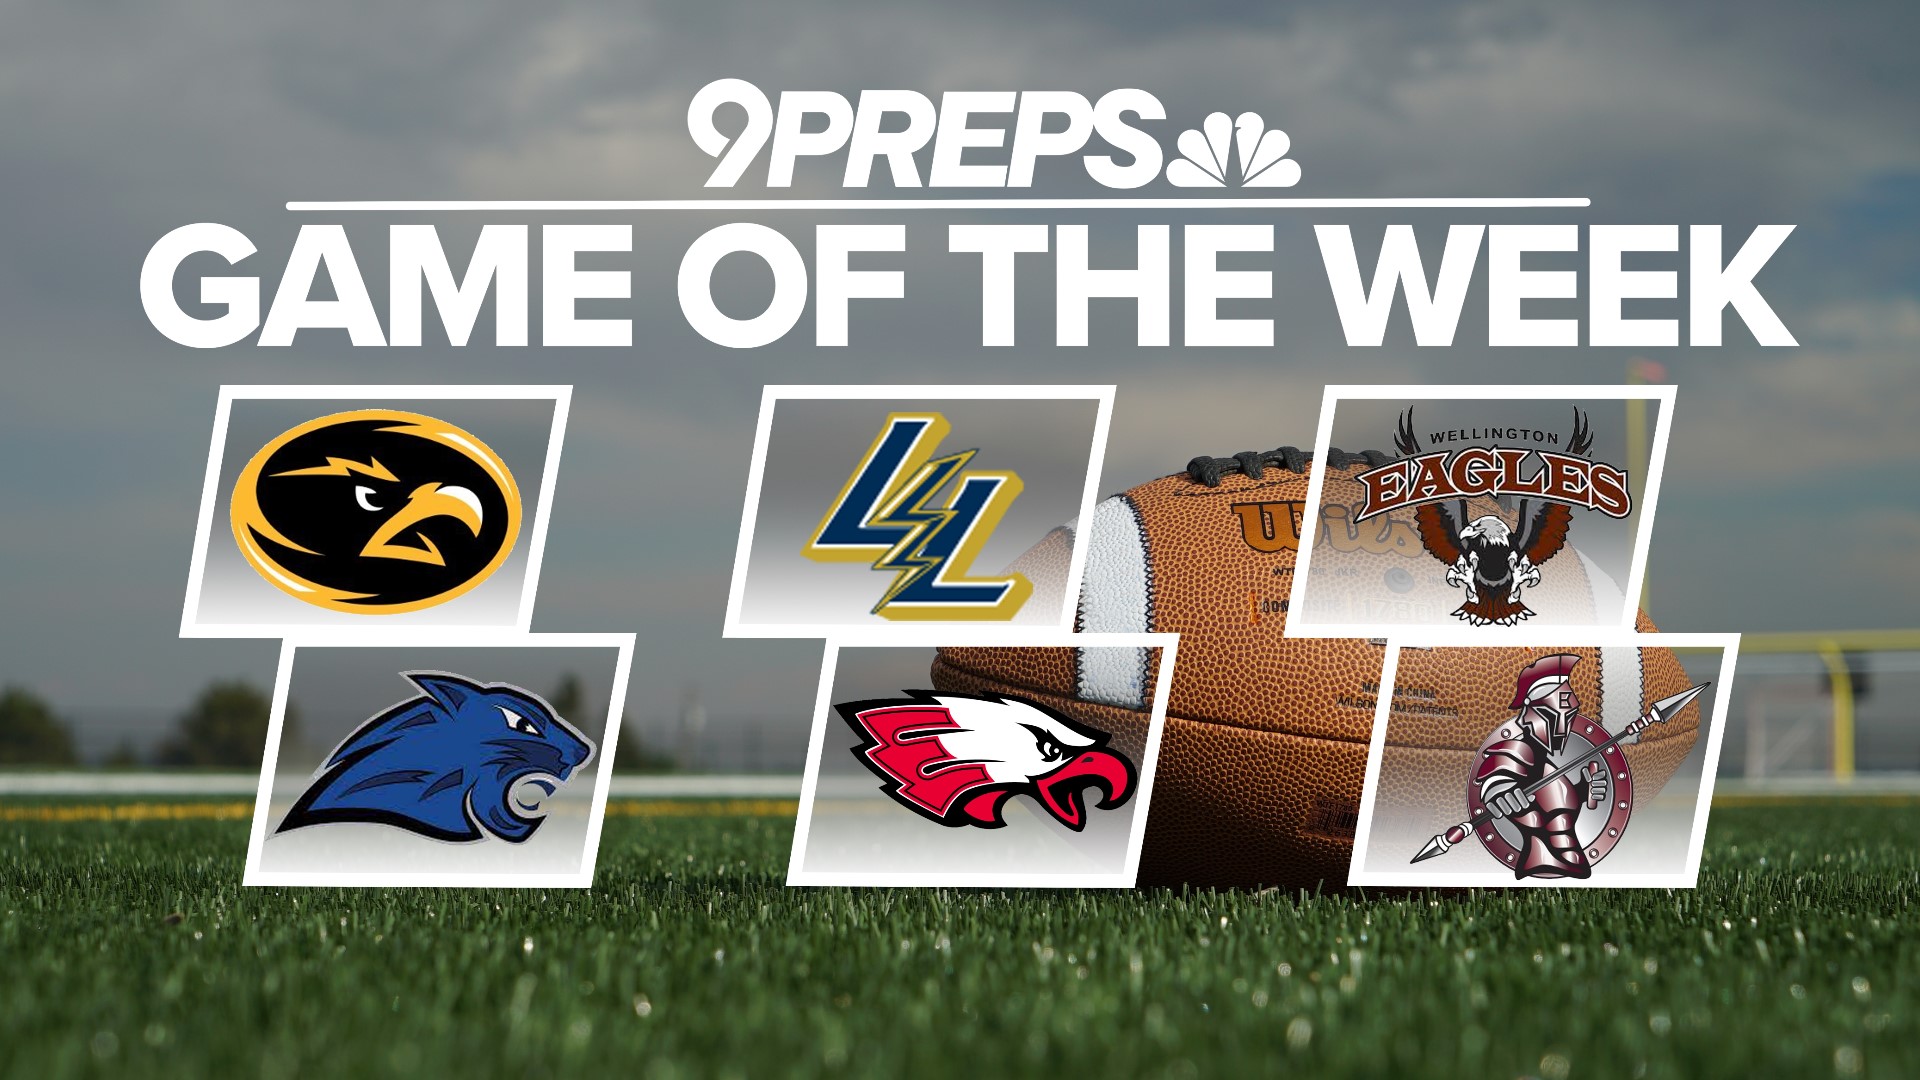 The 9Preps Game of the Week rolls on. Vote to determine which high school football game we showcase on Friday, Nov. 3.